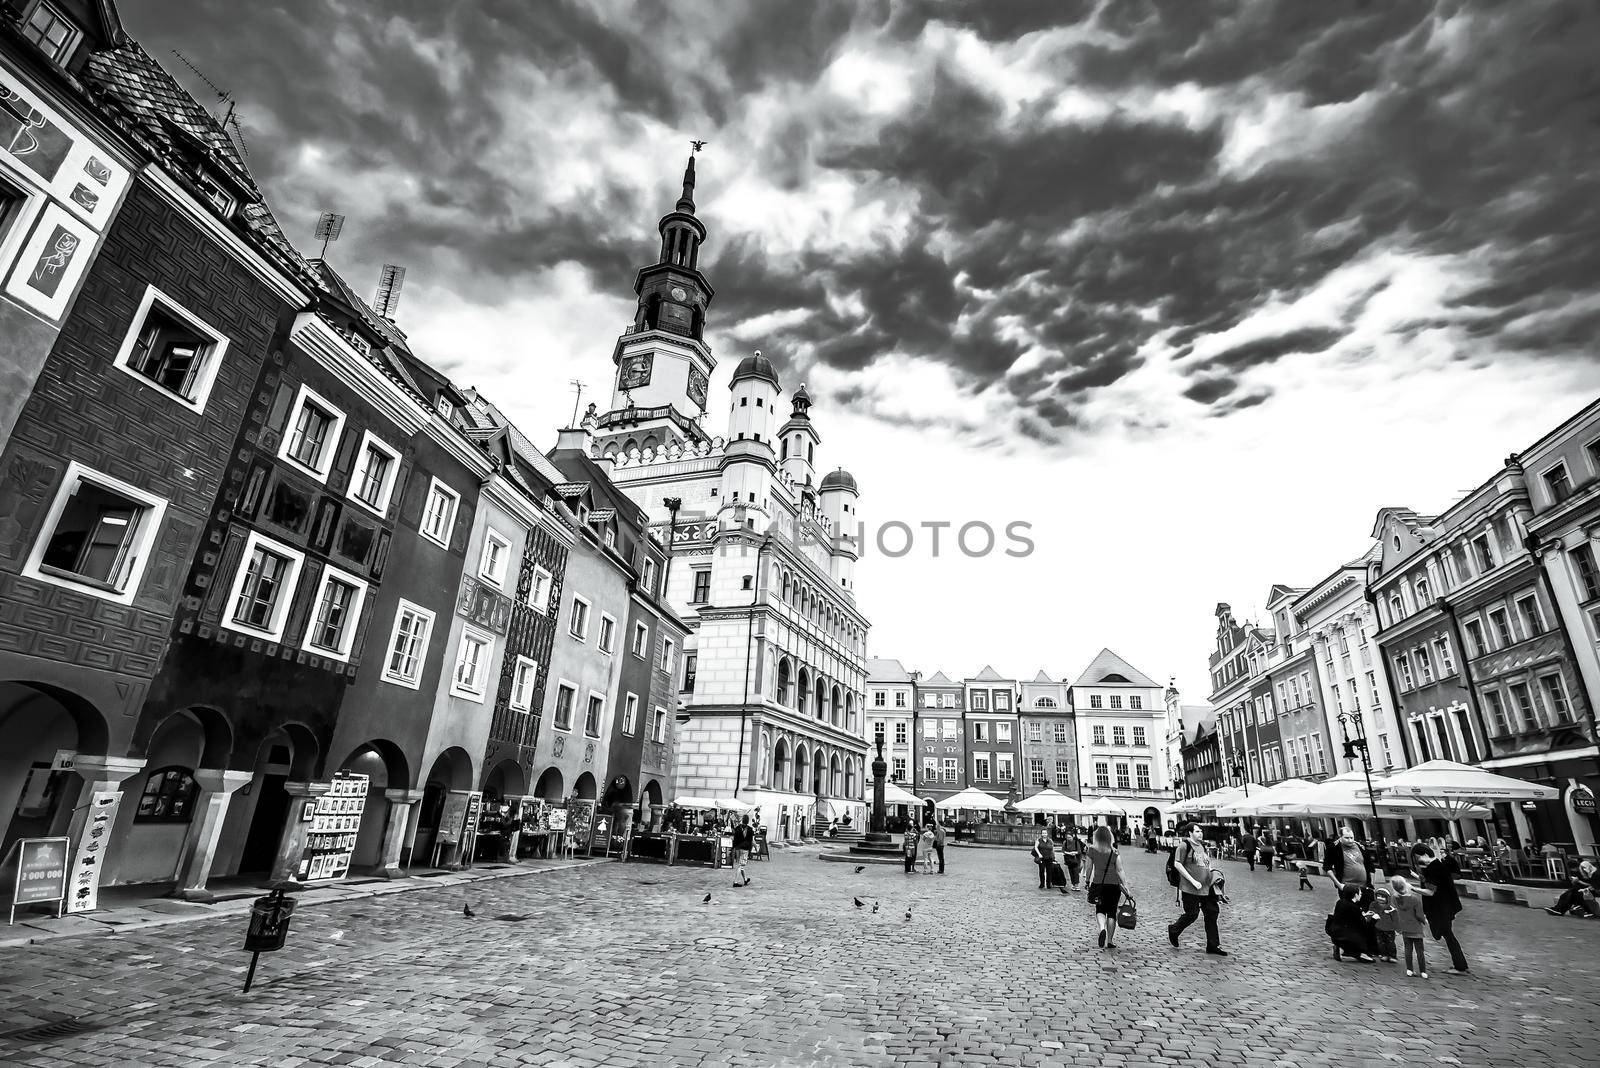 POZNAN, POLAND - AUGUST 21: The central square on August 21, 2013 in Poznan, Poland. Currently, Old Market is the center of tourism Poznan and the most beautiful part of the city.